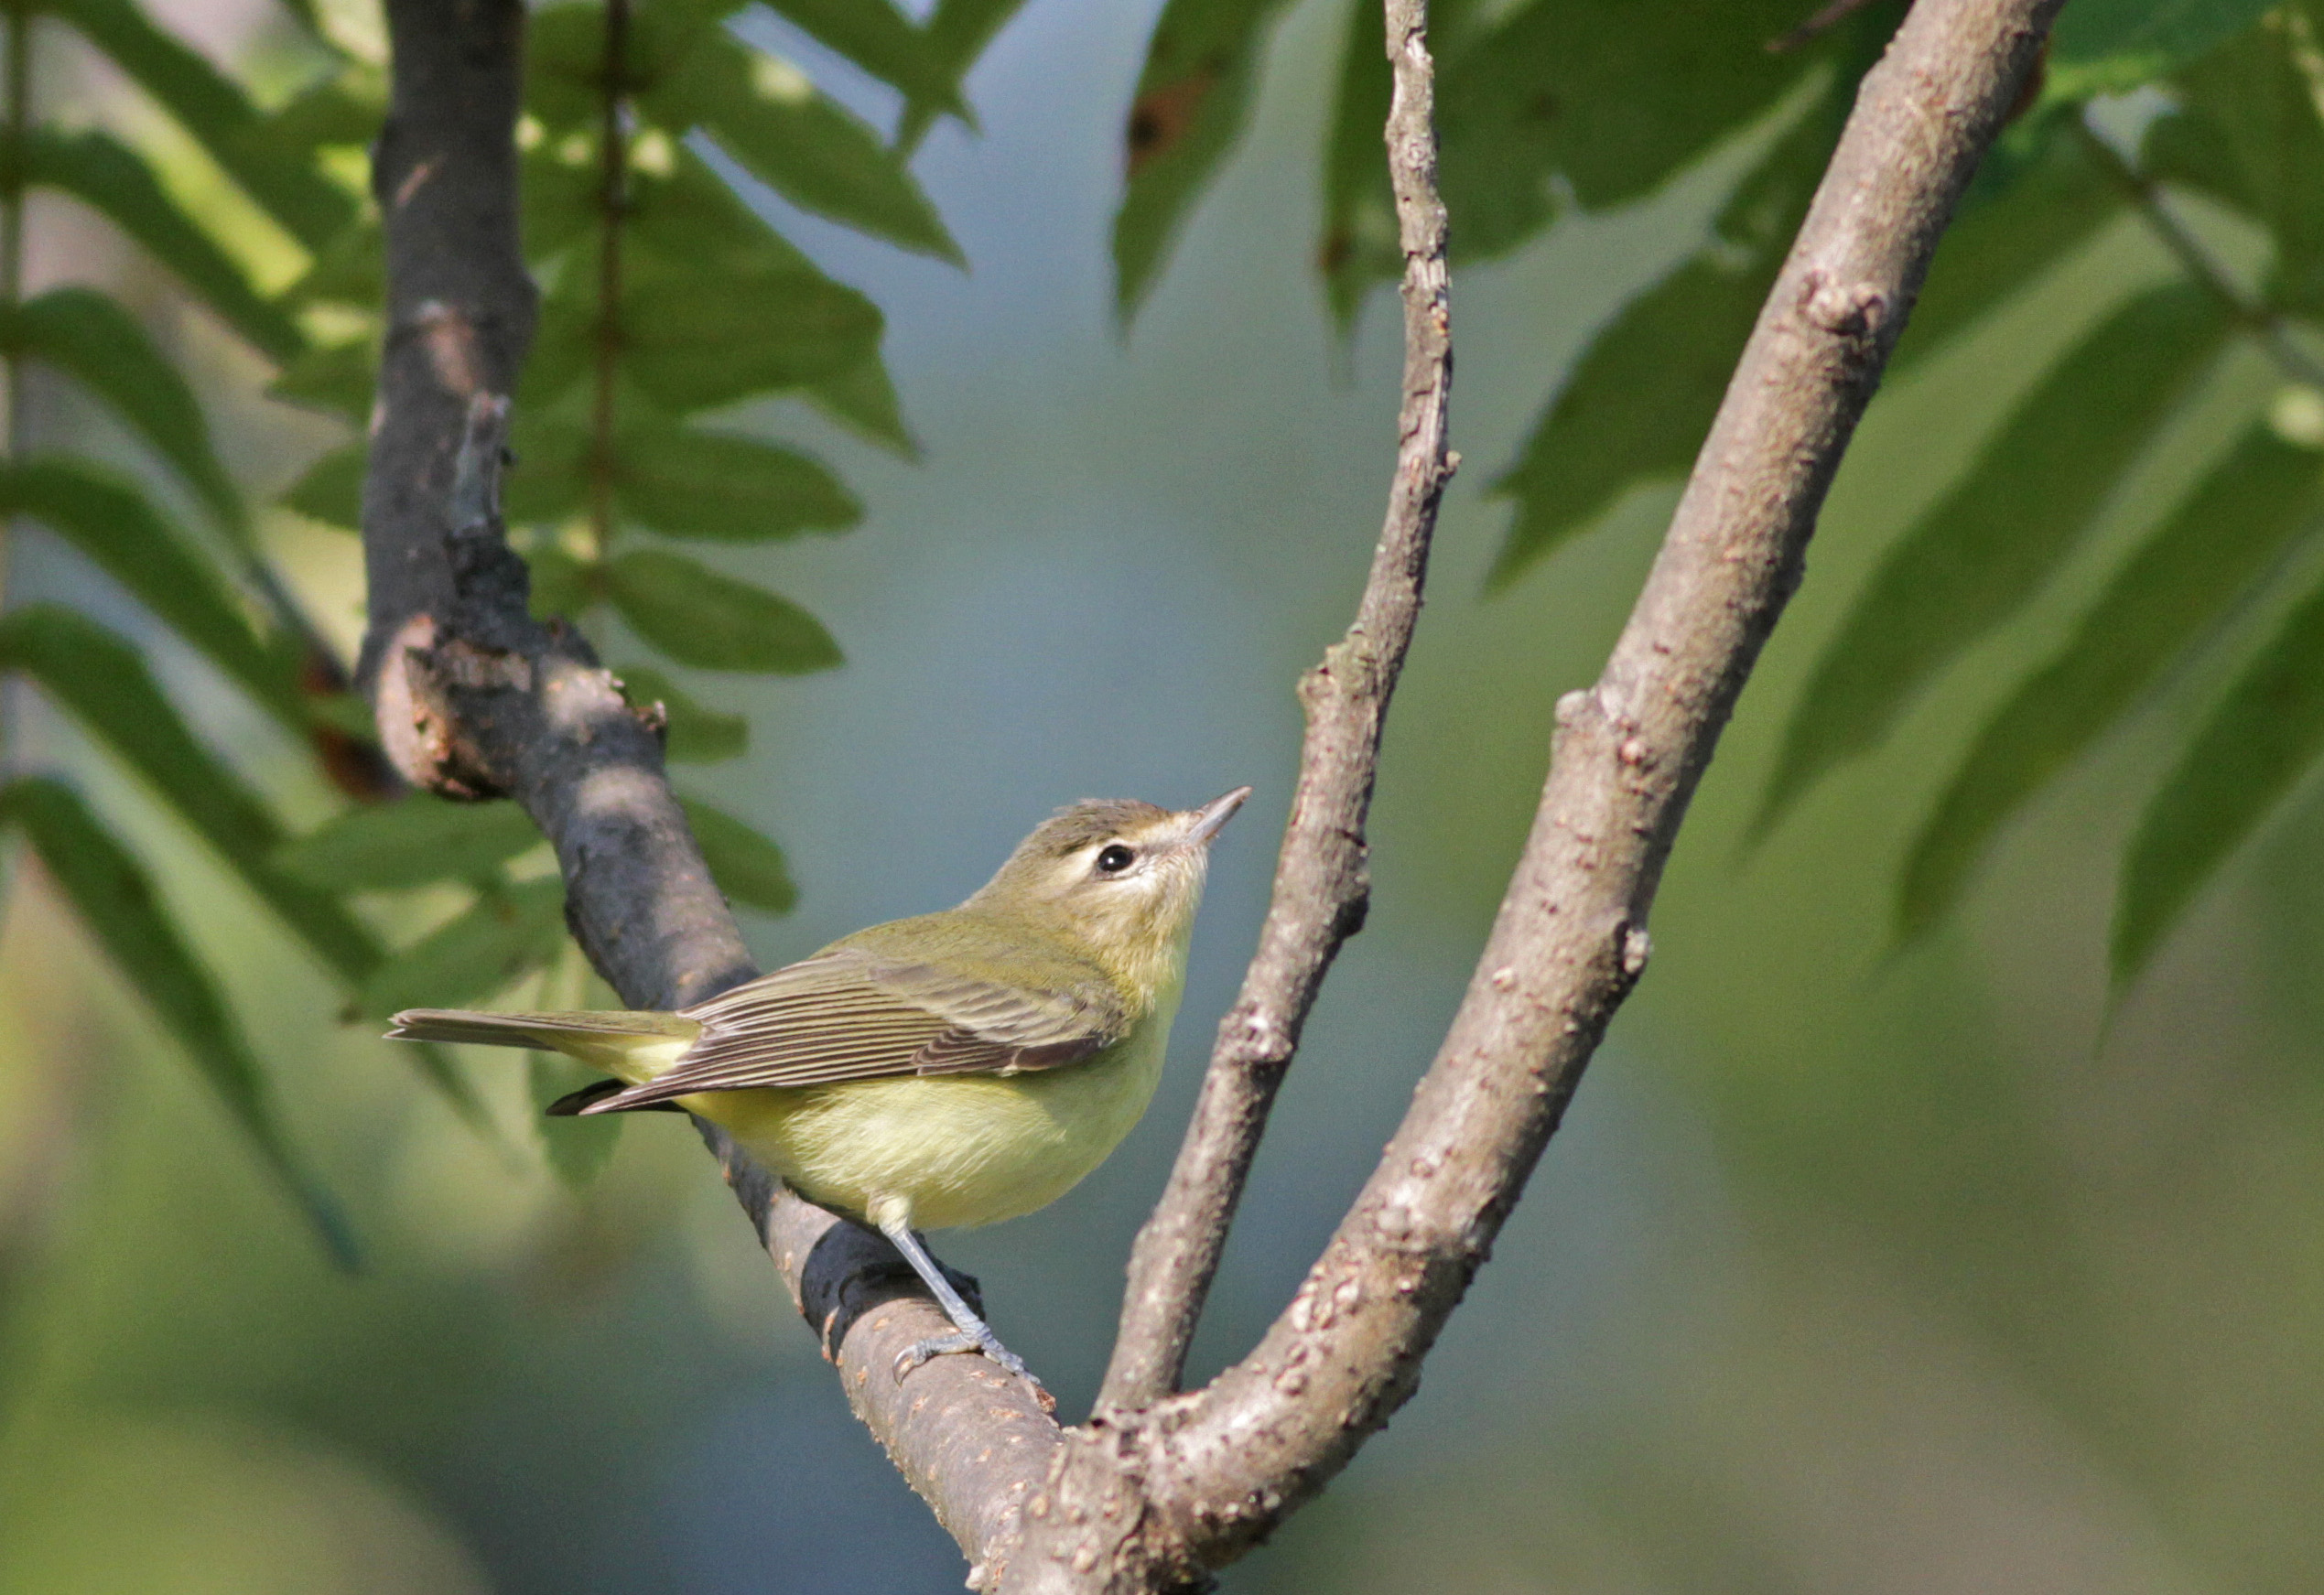 Philadelphia vireo, which winters in areas of increased suitability for cocaine trafficking.